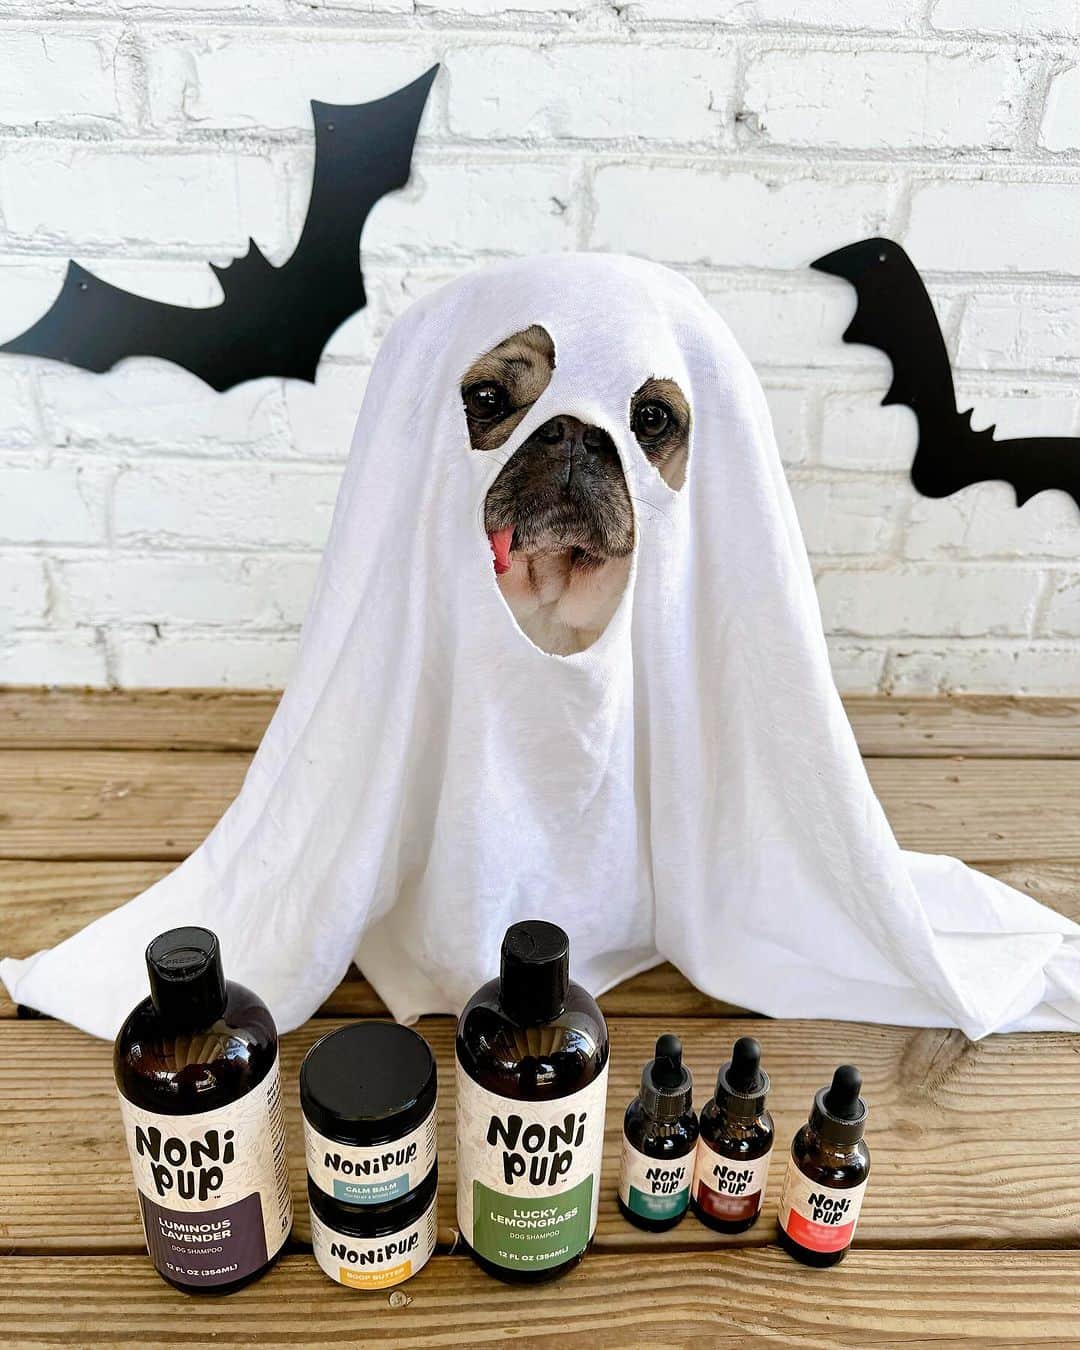 itsdougthepugのインスタグラム：「Beware of the scary ingredients lurking in other pet products, but fear not, Doug The Pug is here with his enchanting new holistic dog company @nonipup!  He's brewed up a cauldron of all-natural, organic goodies that'll cast a spell on your furry friends, leaving them smelling like a treat. Every @nonipup ingredient is ethically sourced, cruelty-free, and as paraben-free as a ghost's closet. These elixirs are so potent, they're human-grade! From bewitching shampoos to crusty nose remedies and hot spot healing balms, they work like magic spells. But don't take Doug’s word for it; let the howls of his delighted customers convince you.  Hop on your broomstick and soar over to www.nonipup.com to snatch up one of Doug's enchanting potions today!  P.S. Brew-tiful surprises are brewing for you in just a few weeks! What could they be? Get ready for a spooktacular reveal! 🧙🦇🎃」